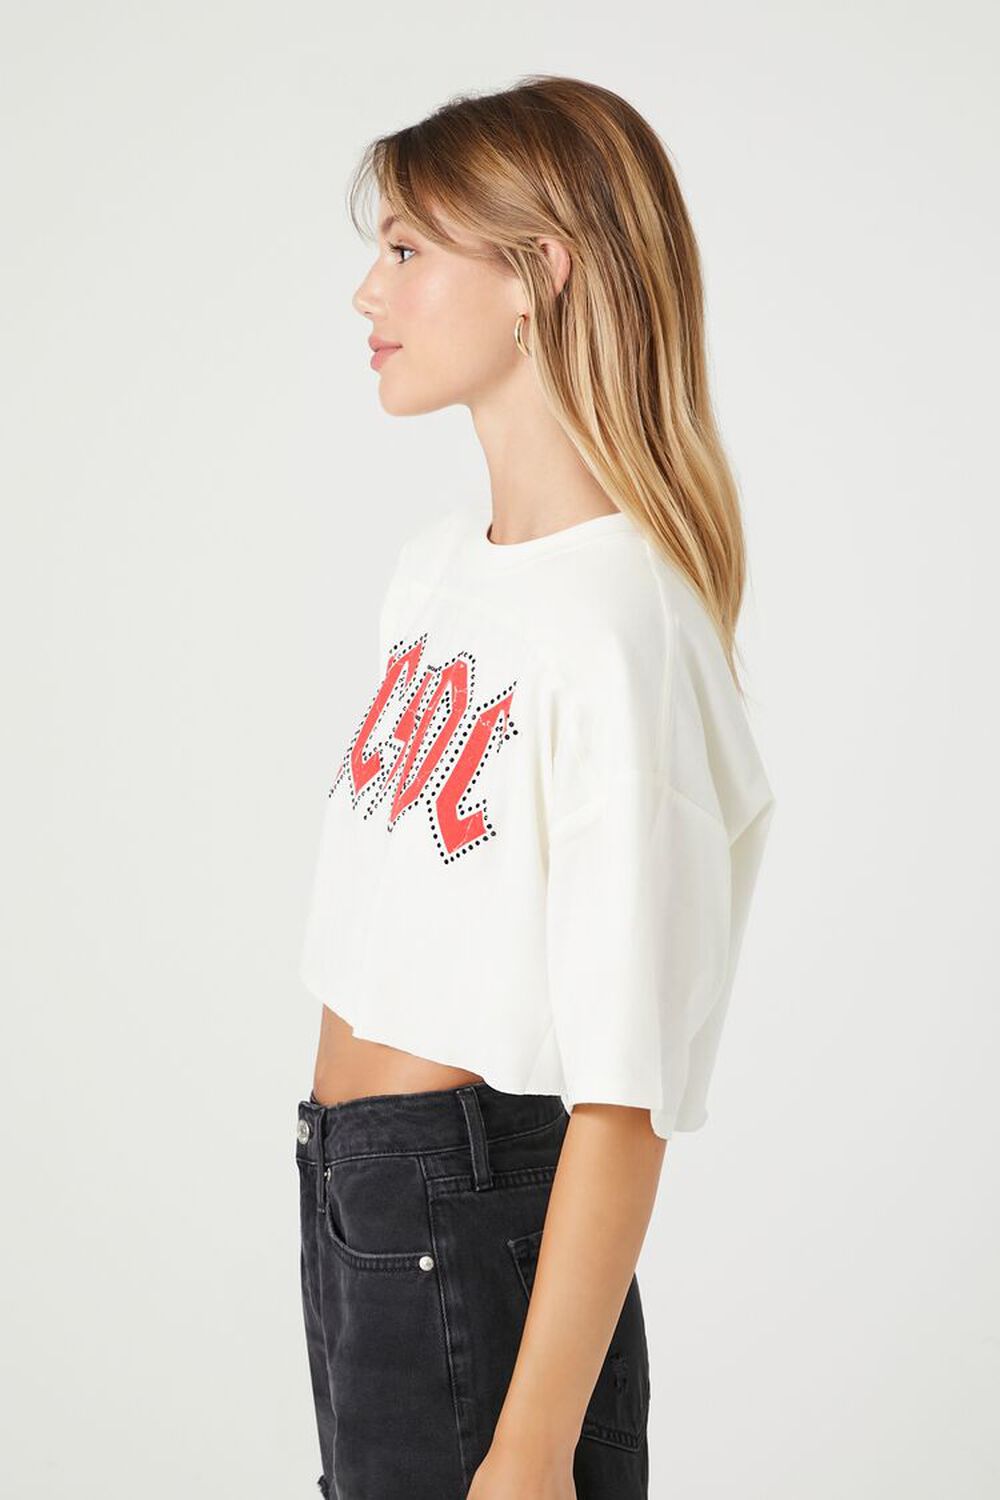 Forever 21 ACDC Graphic Hockey Jersey